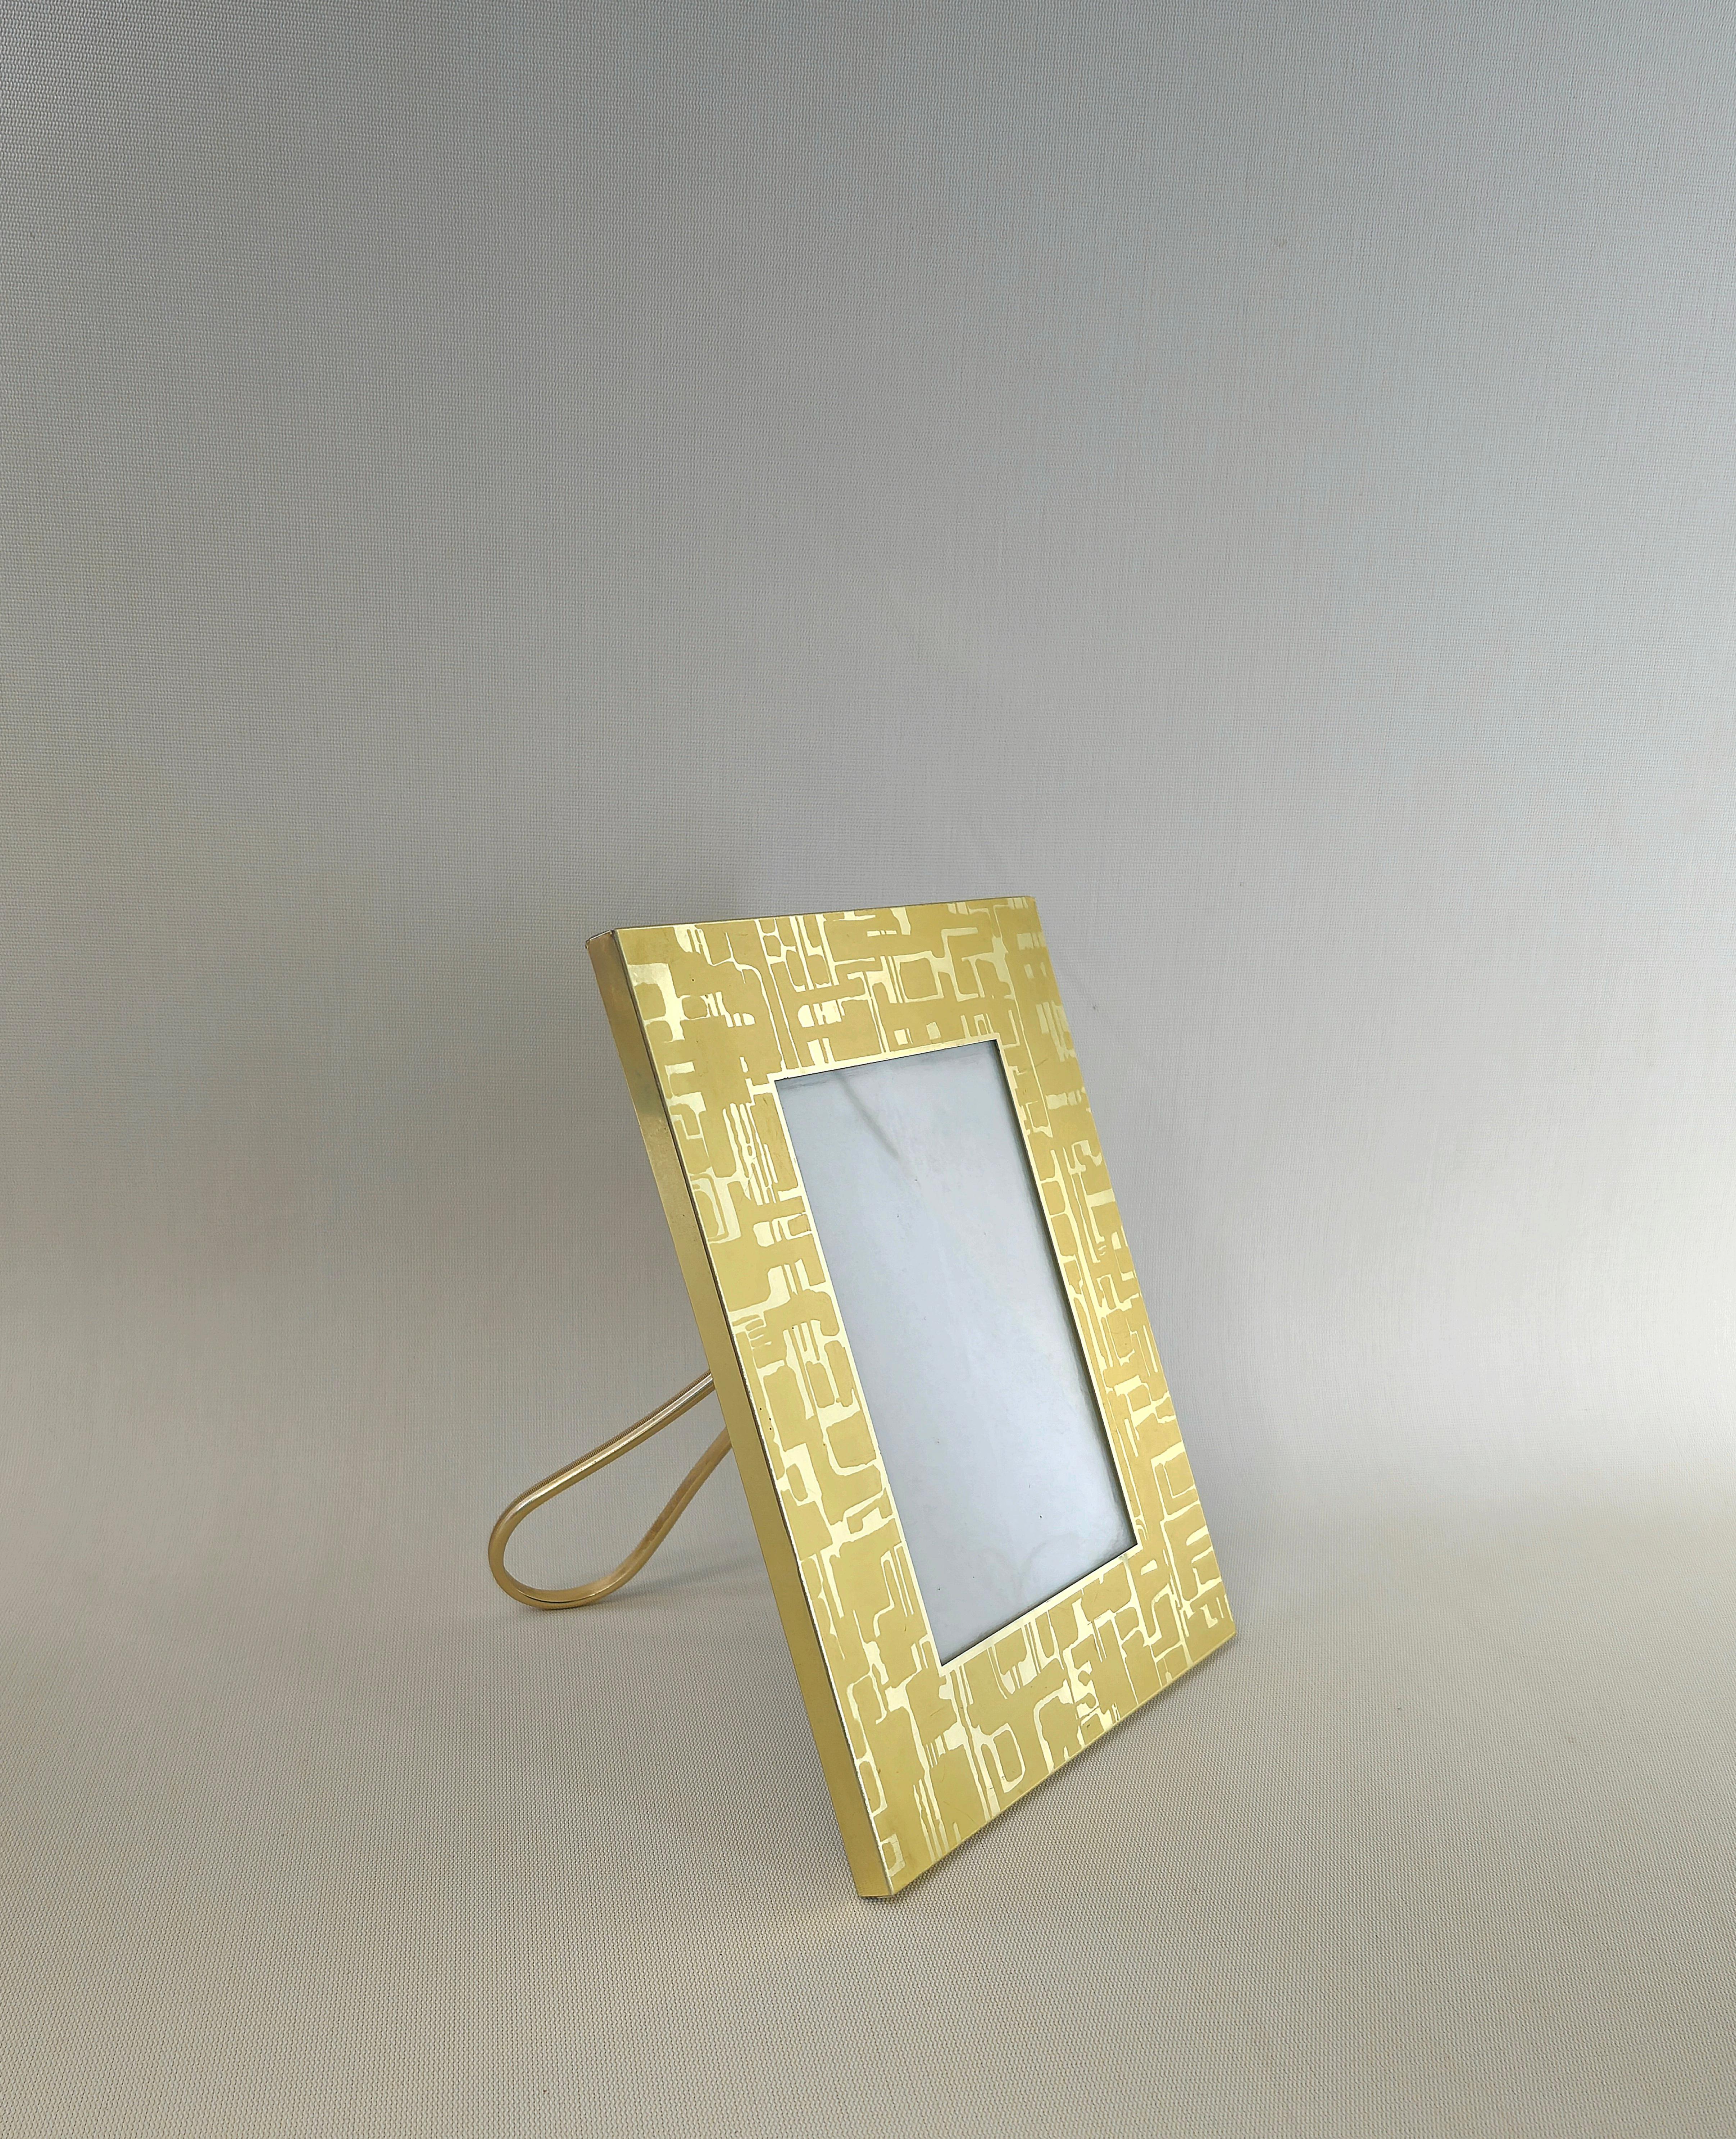 Photo frame made with golden brass support and frame. Made in Italy in the 70s.


Note: We try to offer our customers an excellent service even in shipments all over the world, collaborating with one of the best shipping partners, DHL, with very